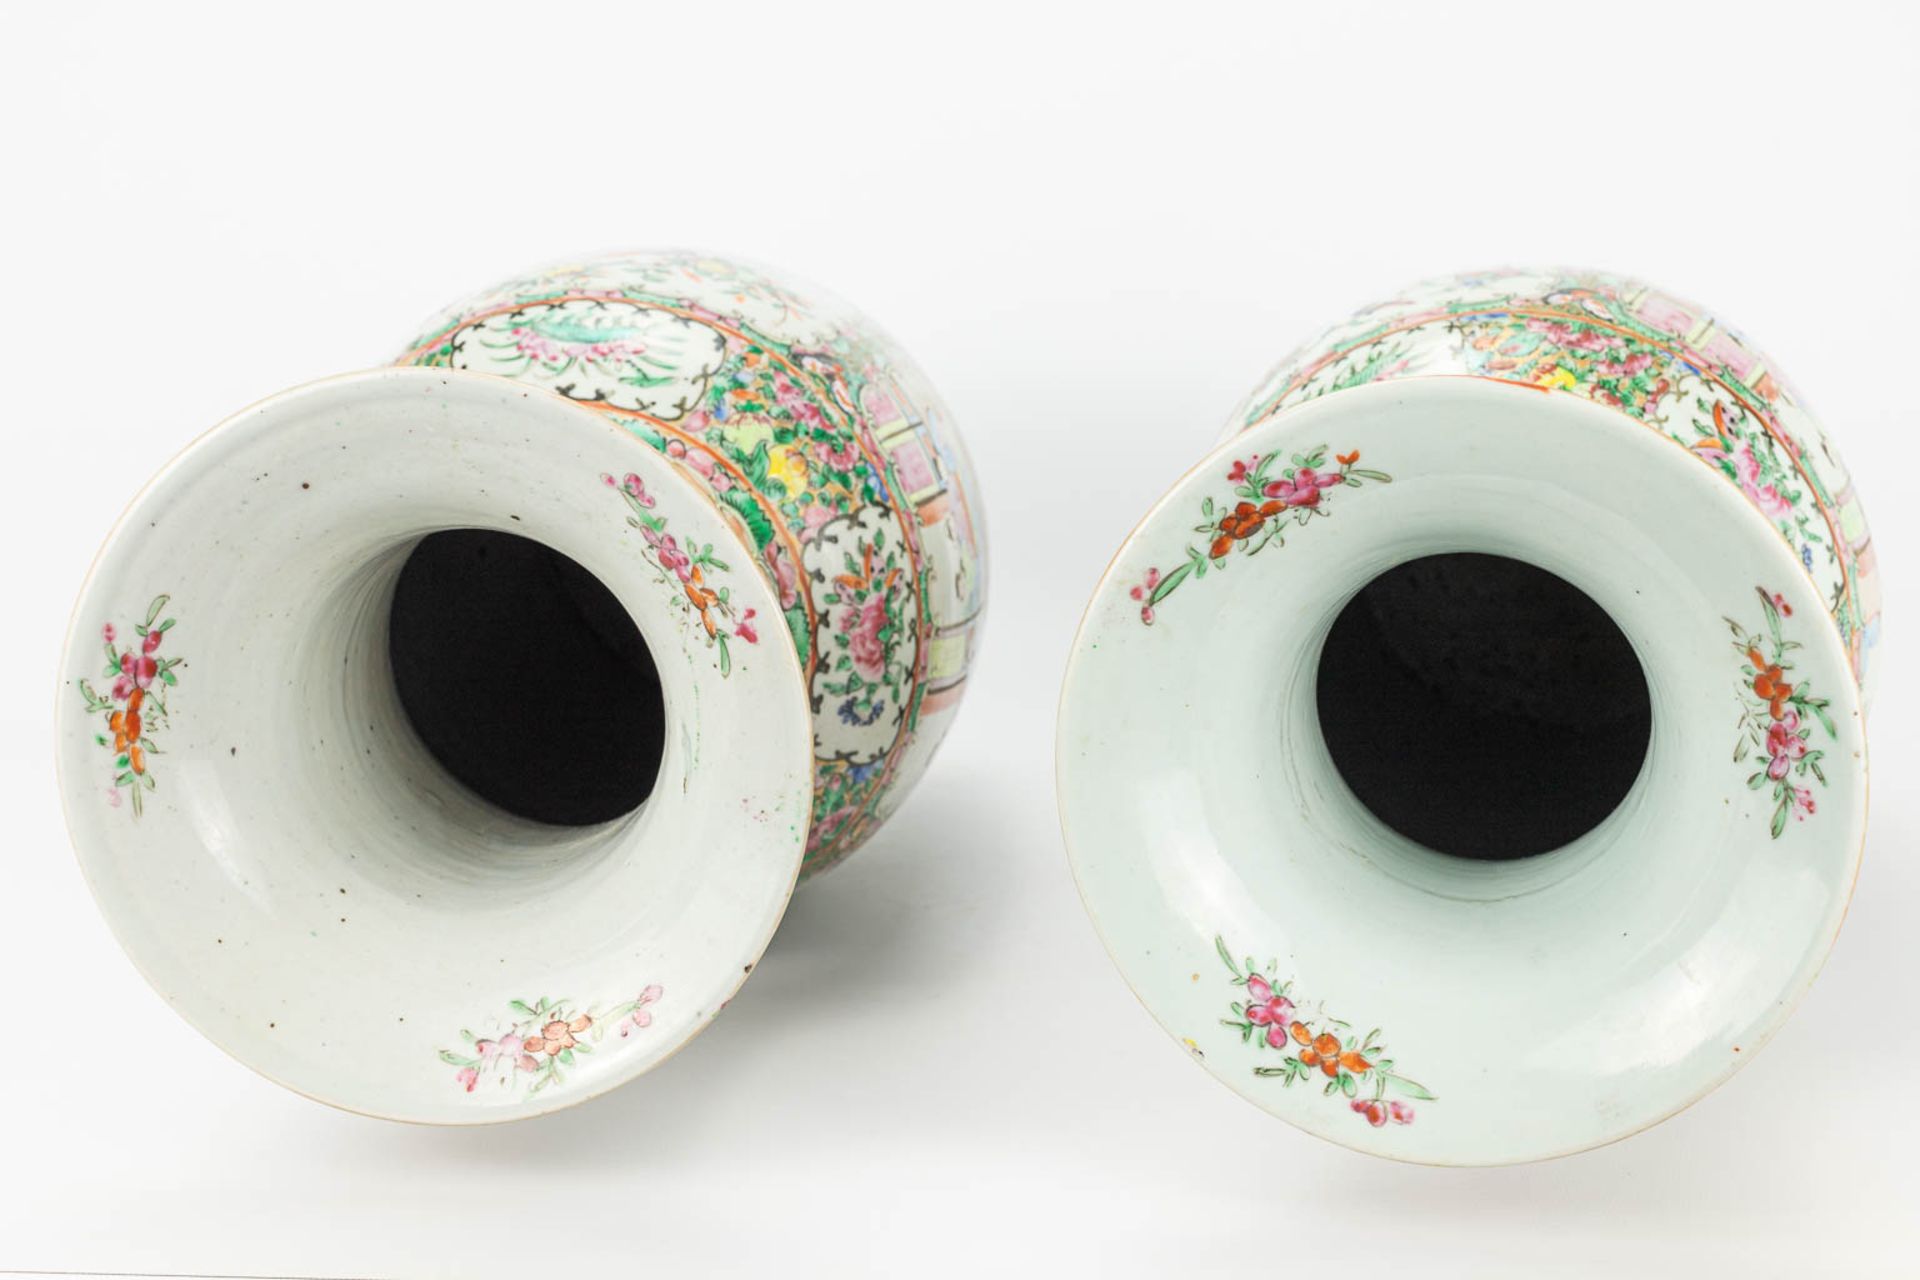 A pair of vases made of Chinese porcelain in Canton style. 19th century. - Image 3 of 17